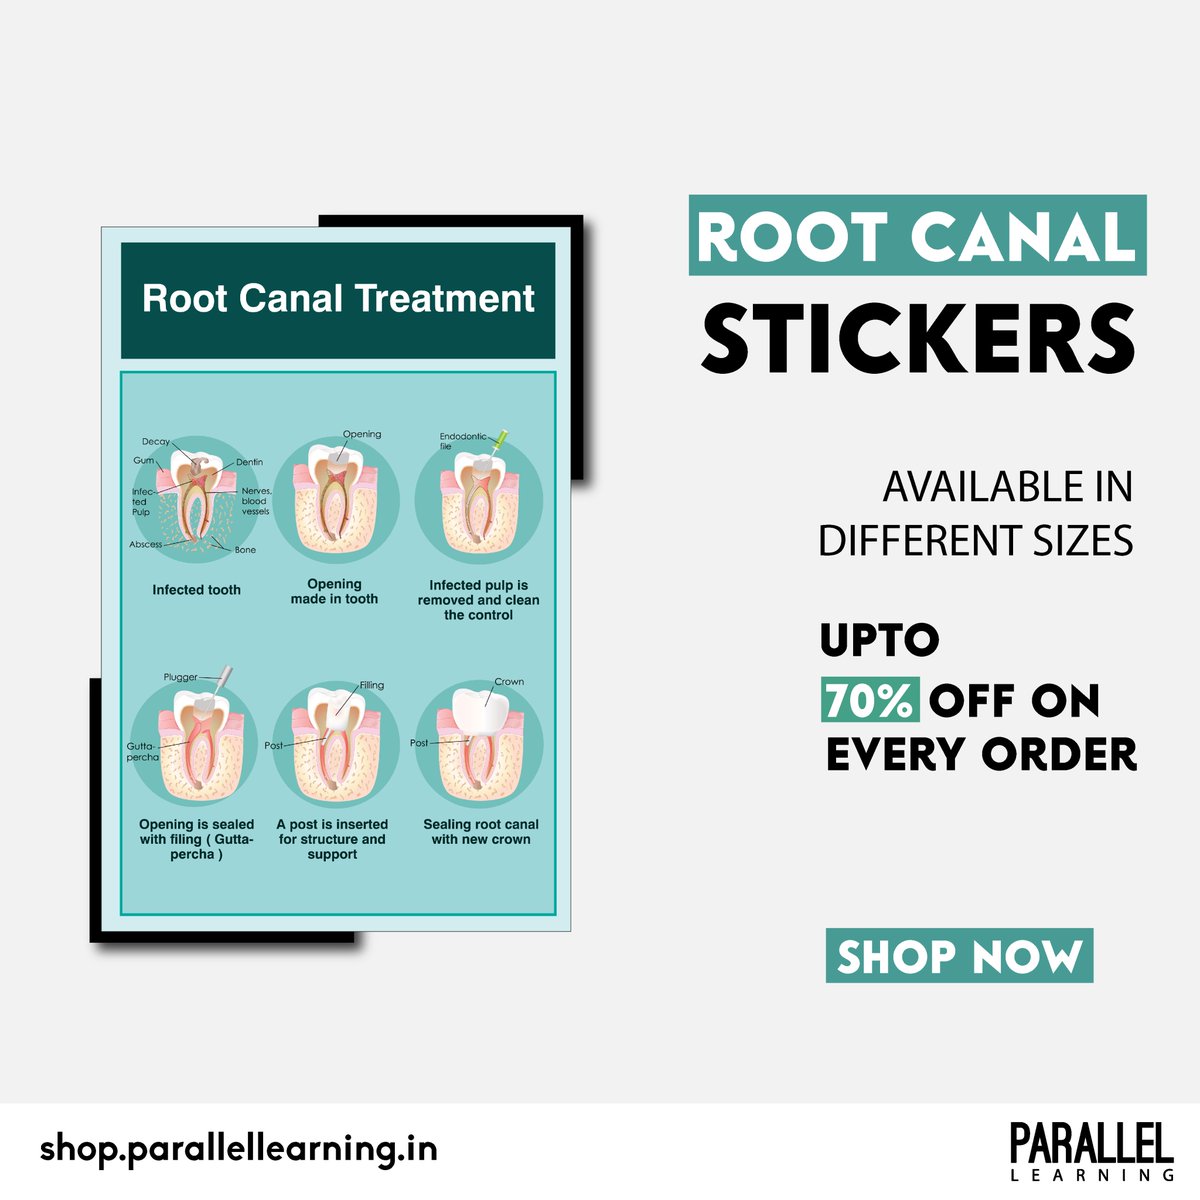 Root canal treatment process stickers & posters for dental clinic. 
Features-
✅Premium quality 
✅waterproof 
✅Starting at Rs- 65/- Only
✅COD Available (INDIA)
.
.
shop.parallellearning.in/collections/de…
#dentist #dentistry #smile #teeth #dentista #tooth #dentalclinic #ParallelLearning